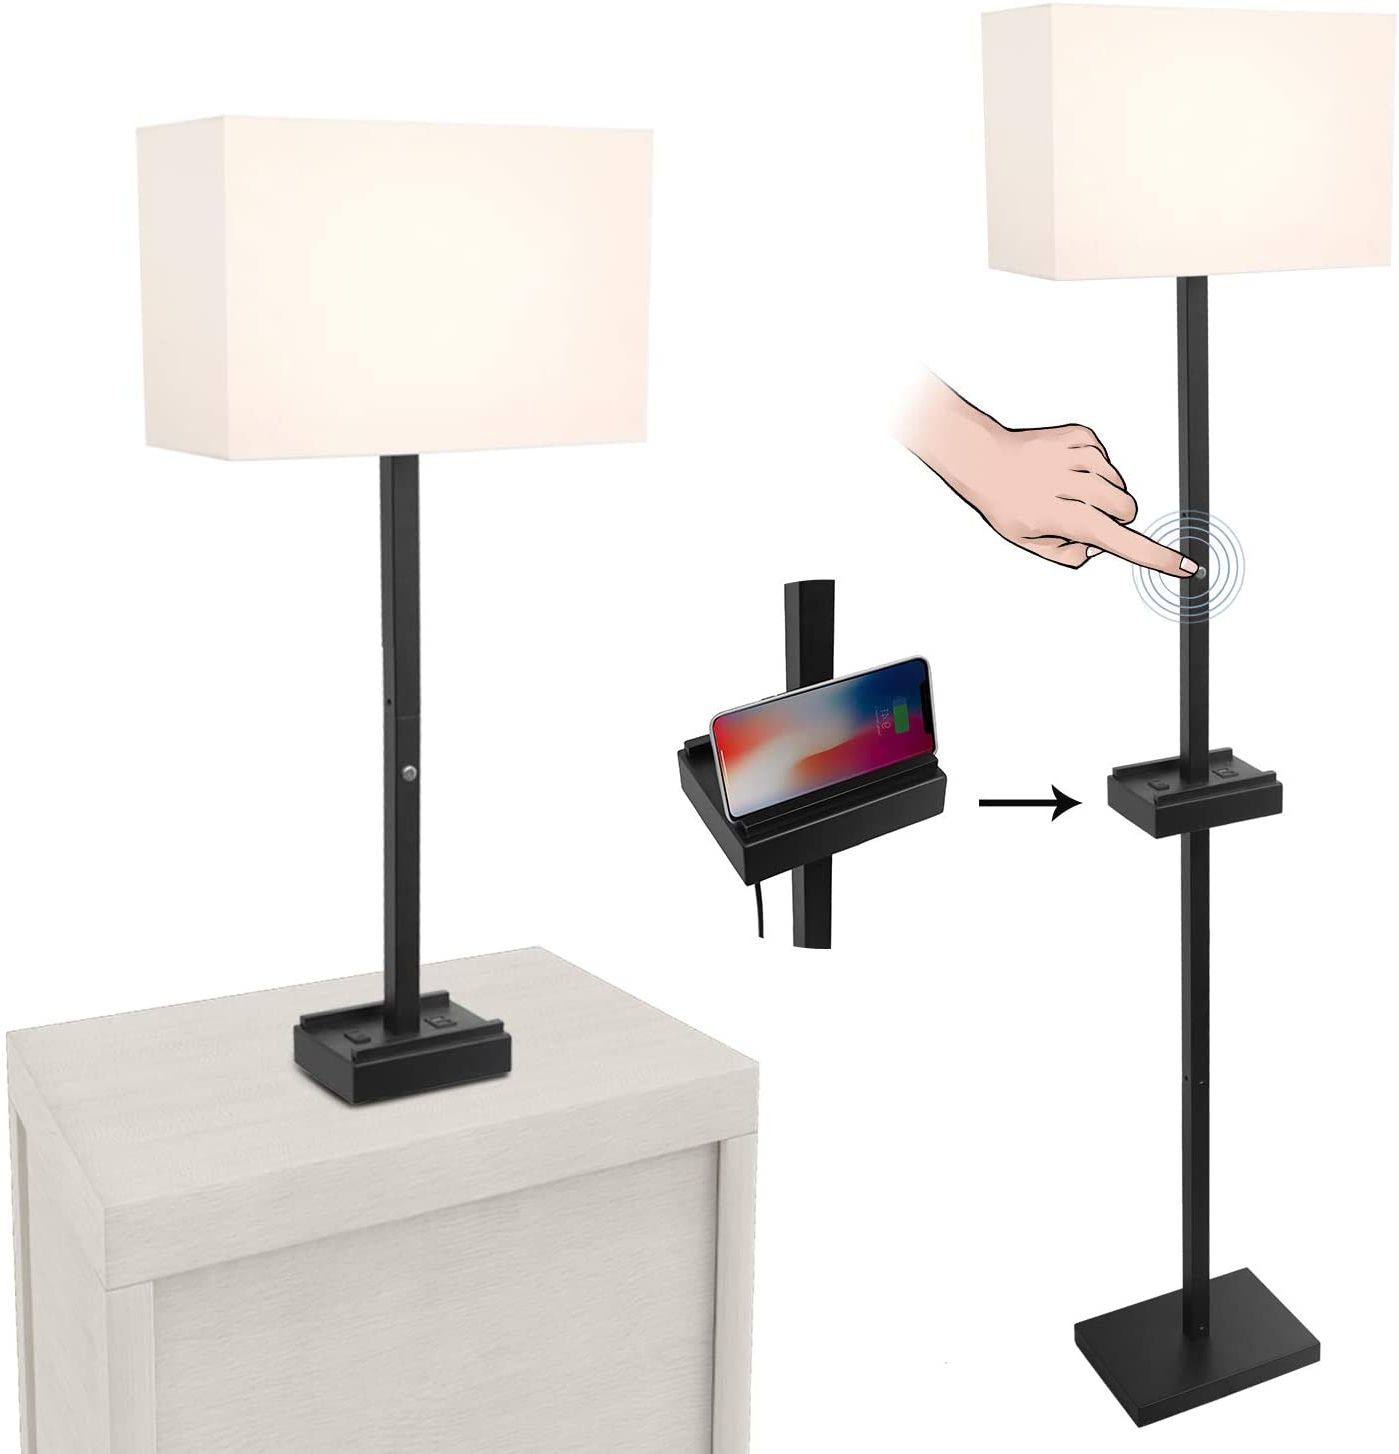 Most Up To Date Standing Lamps With Usb In Floor Lamp For Living Room, Modern Standing Lamp Table Lamp 2 In 1 With  Linen Shade, 3 Way Touch Control Dimmable Tall Lamp With 2 Usb Port & Ac  Outlet 10w Edison (View 7 of 10)